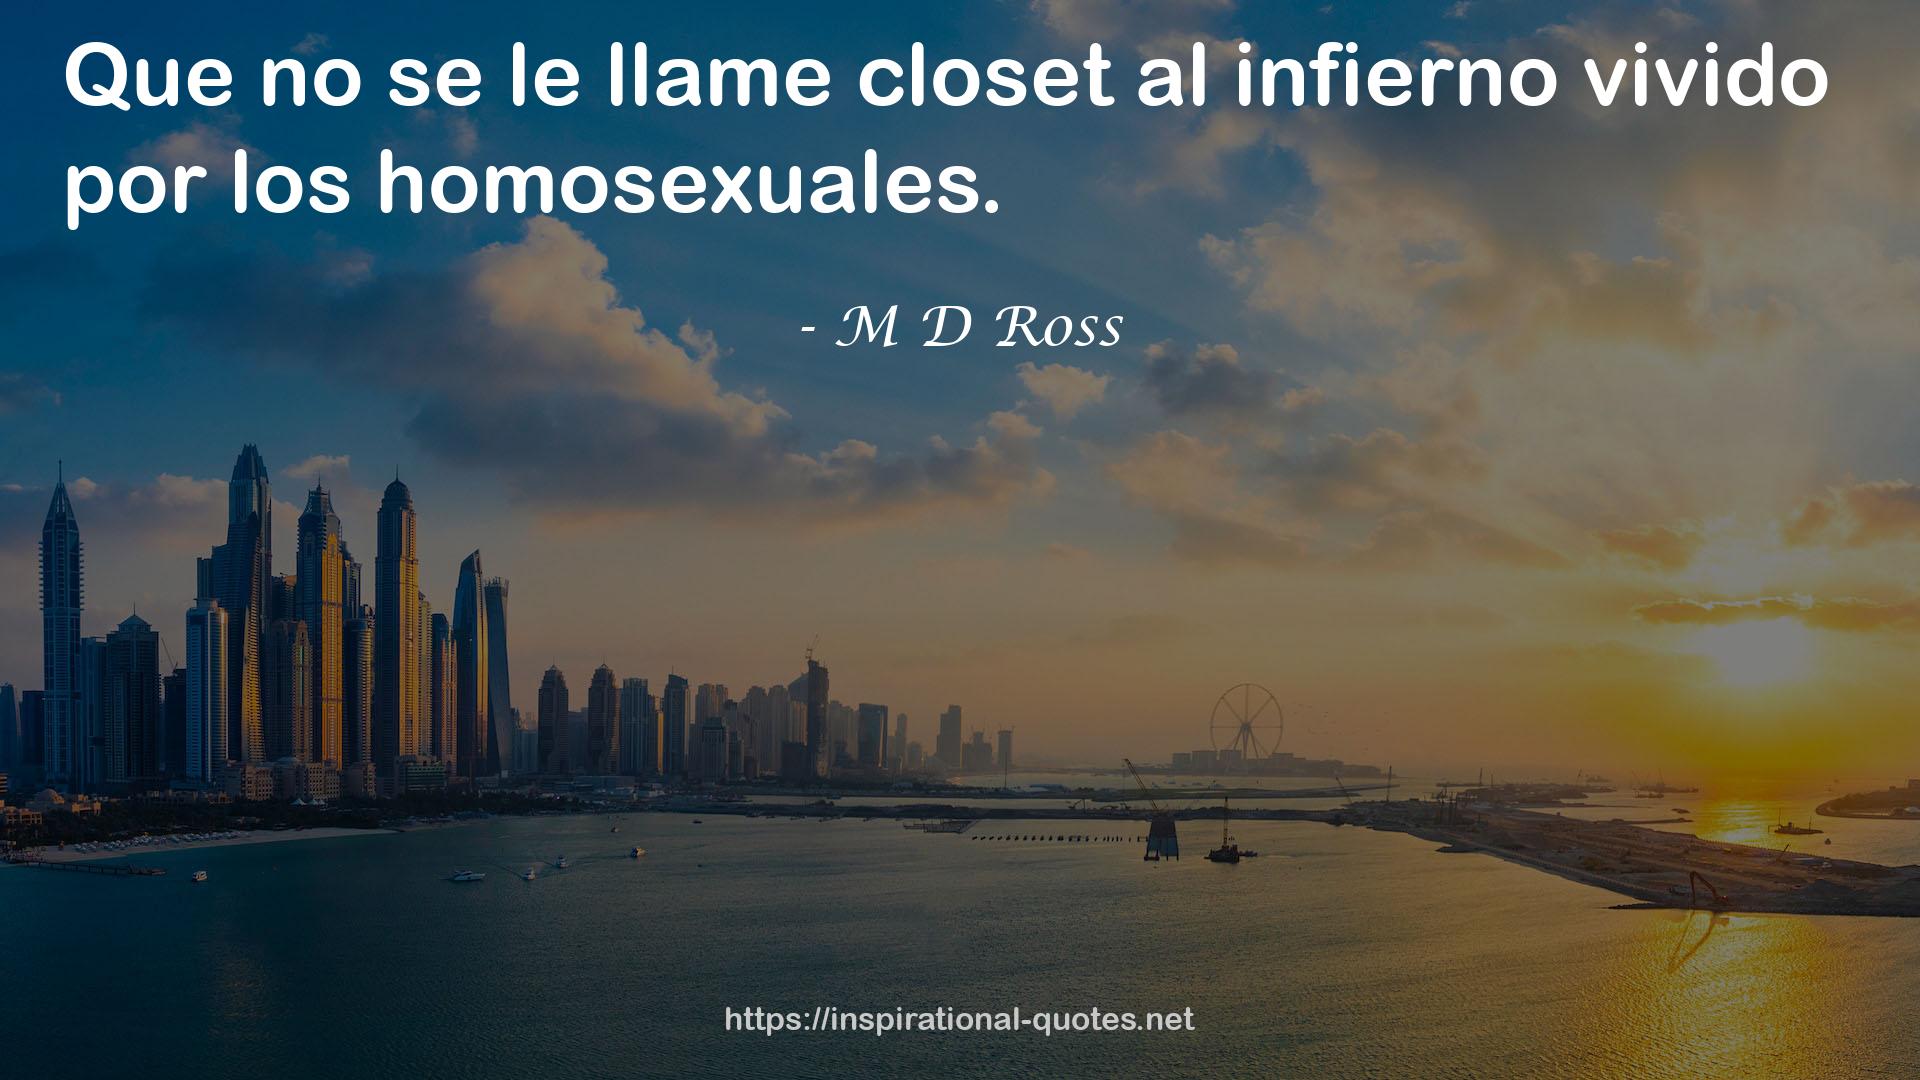 M D Ross QUOTES